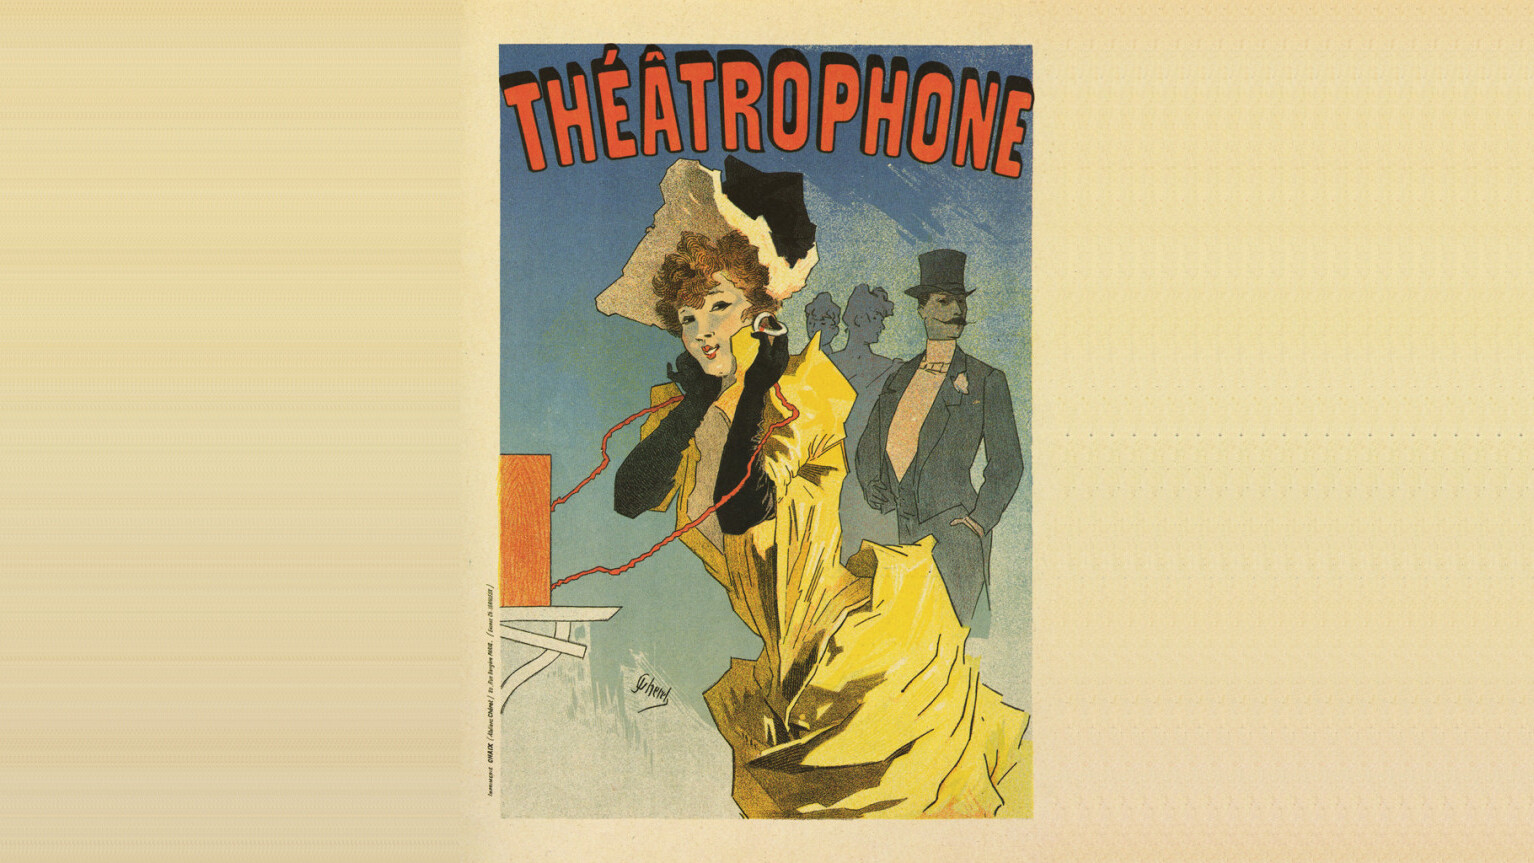 Meet the electrophone, the Victorian version of live-streaming